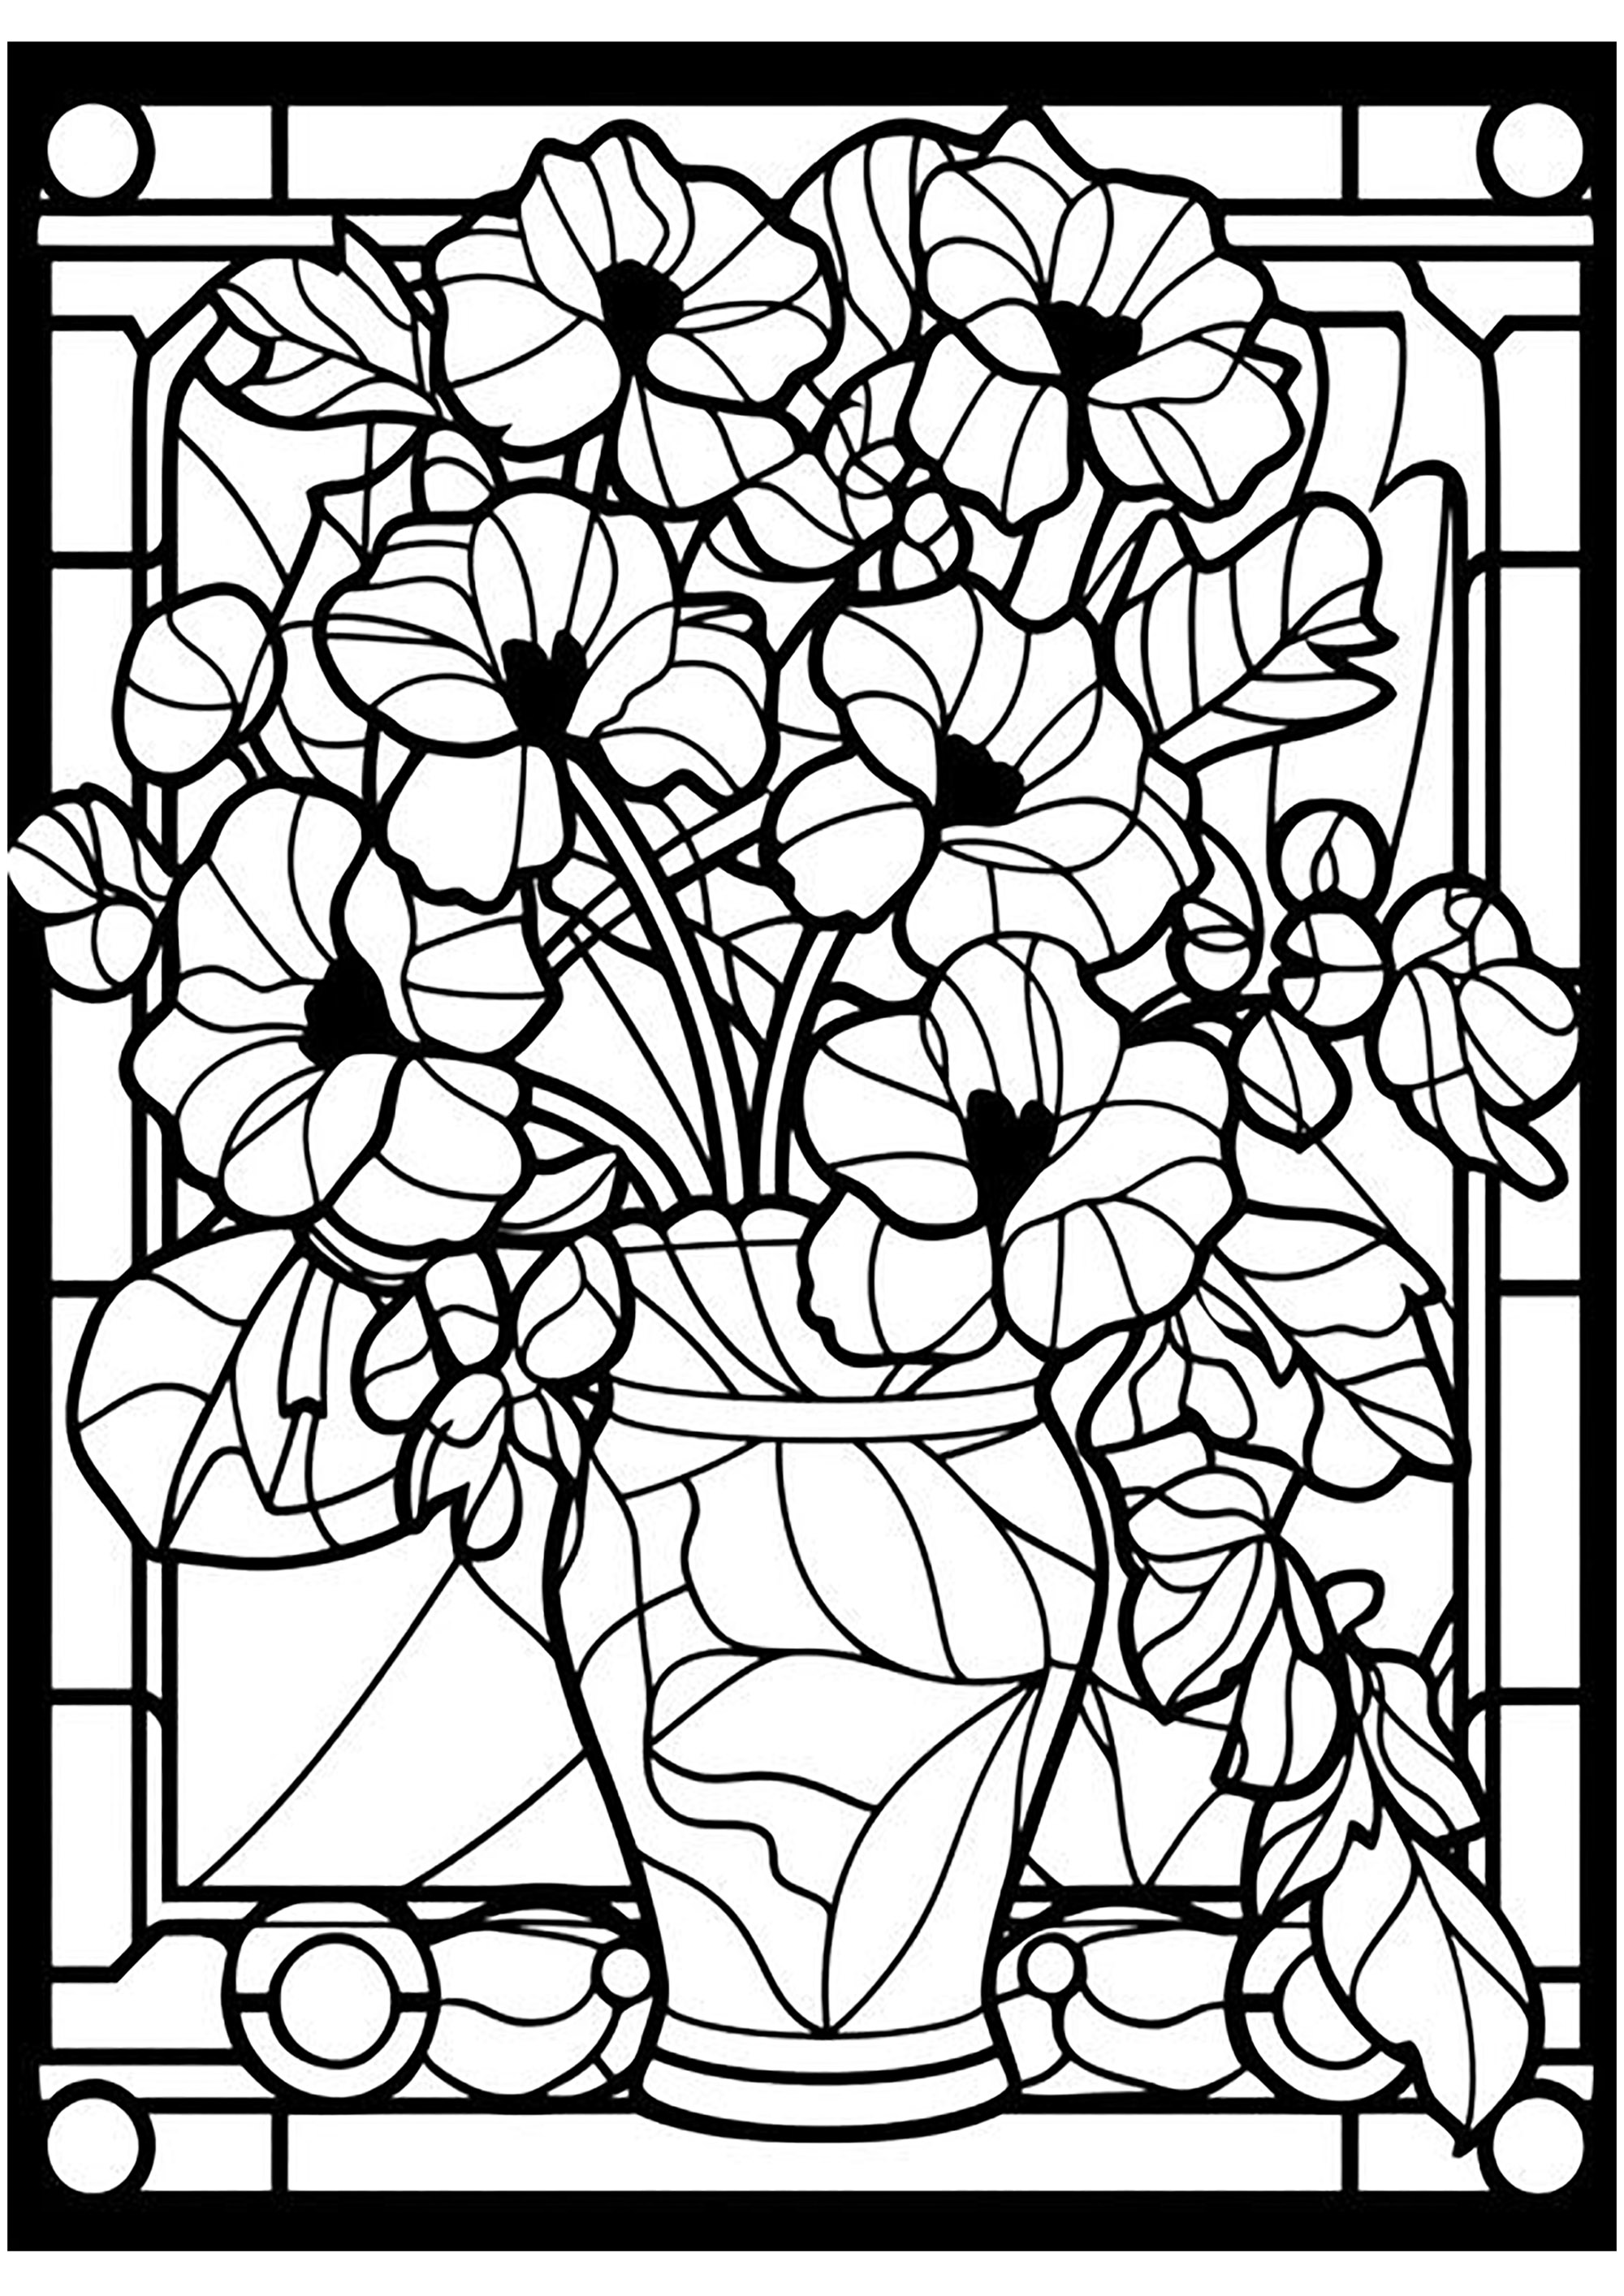 Imaginary stained glass window with a beautiful vase filled with flowers and abstract motifs